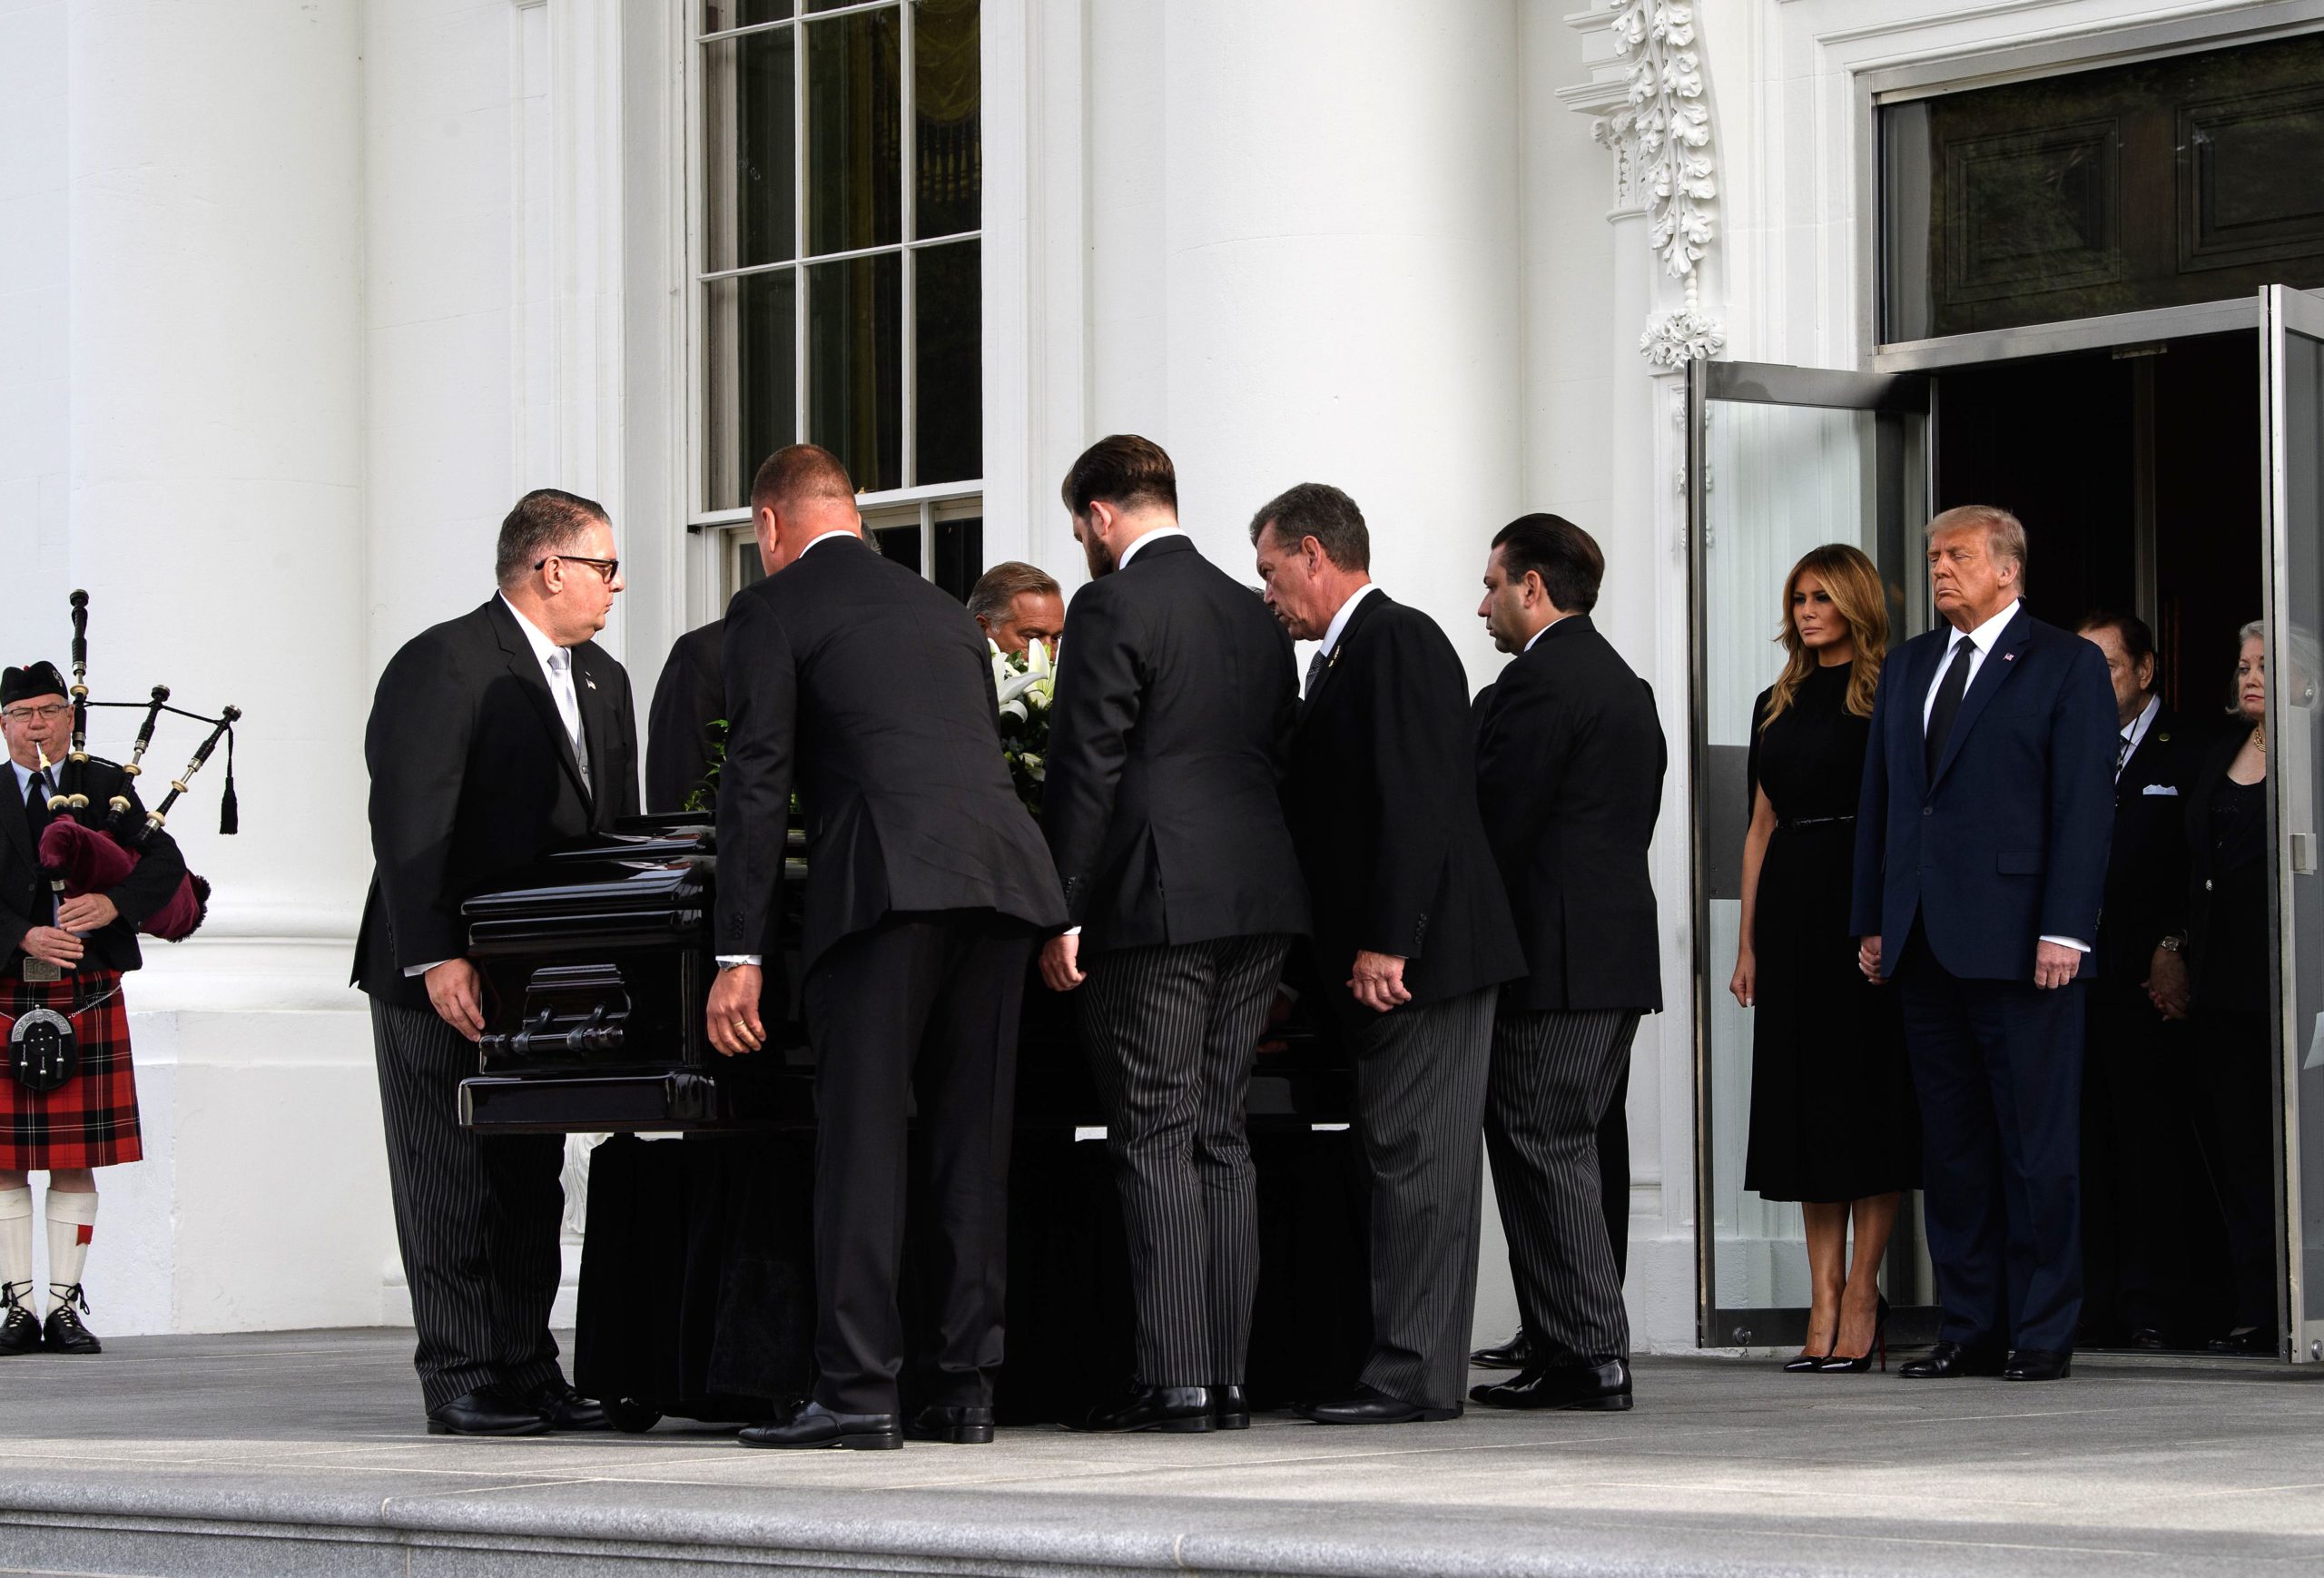 US President Donald Trump and First Lady Melania Trump watch pallbearers carry the casket of Trump's younger brother Robert, following a memorial service at the White House in Washington, DC, on August 21, 2020. (Nicholas Kamm/AFP via Getty Images)